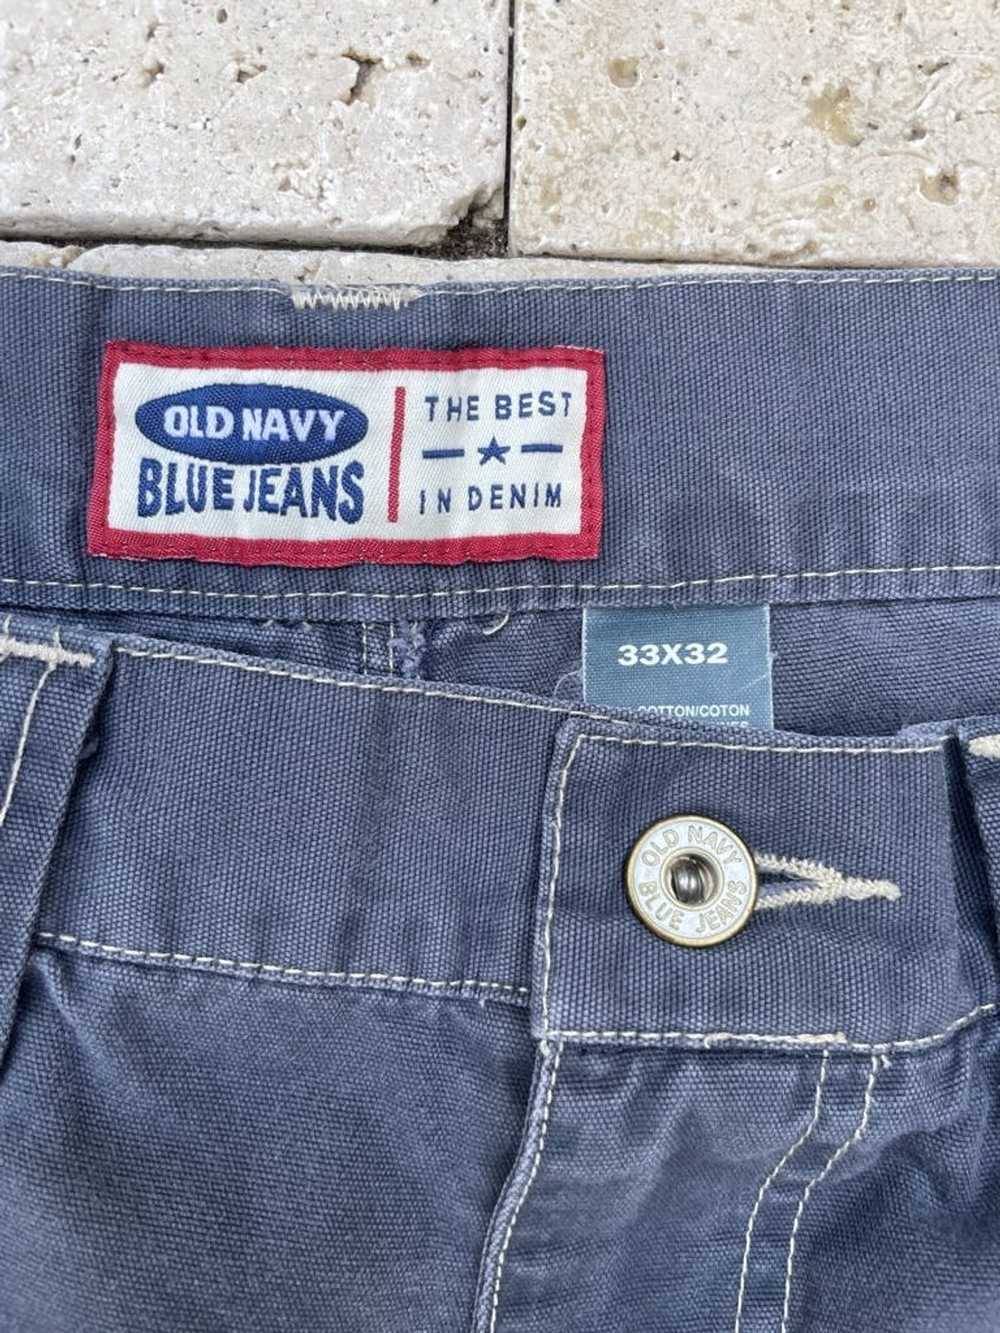 Old Navy old navy pants that can be shorts - image 3